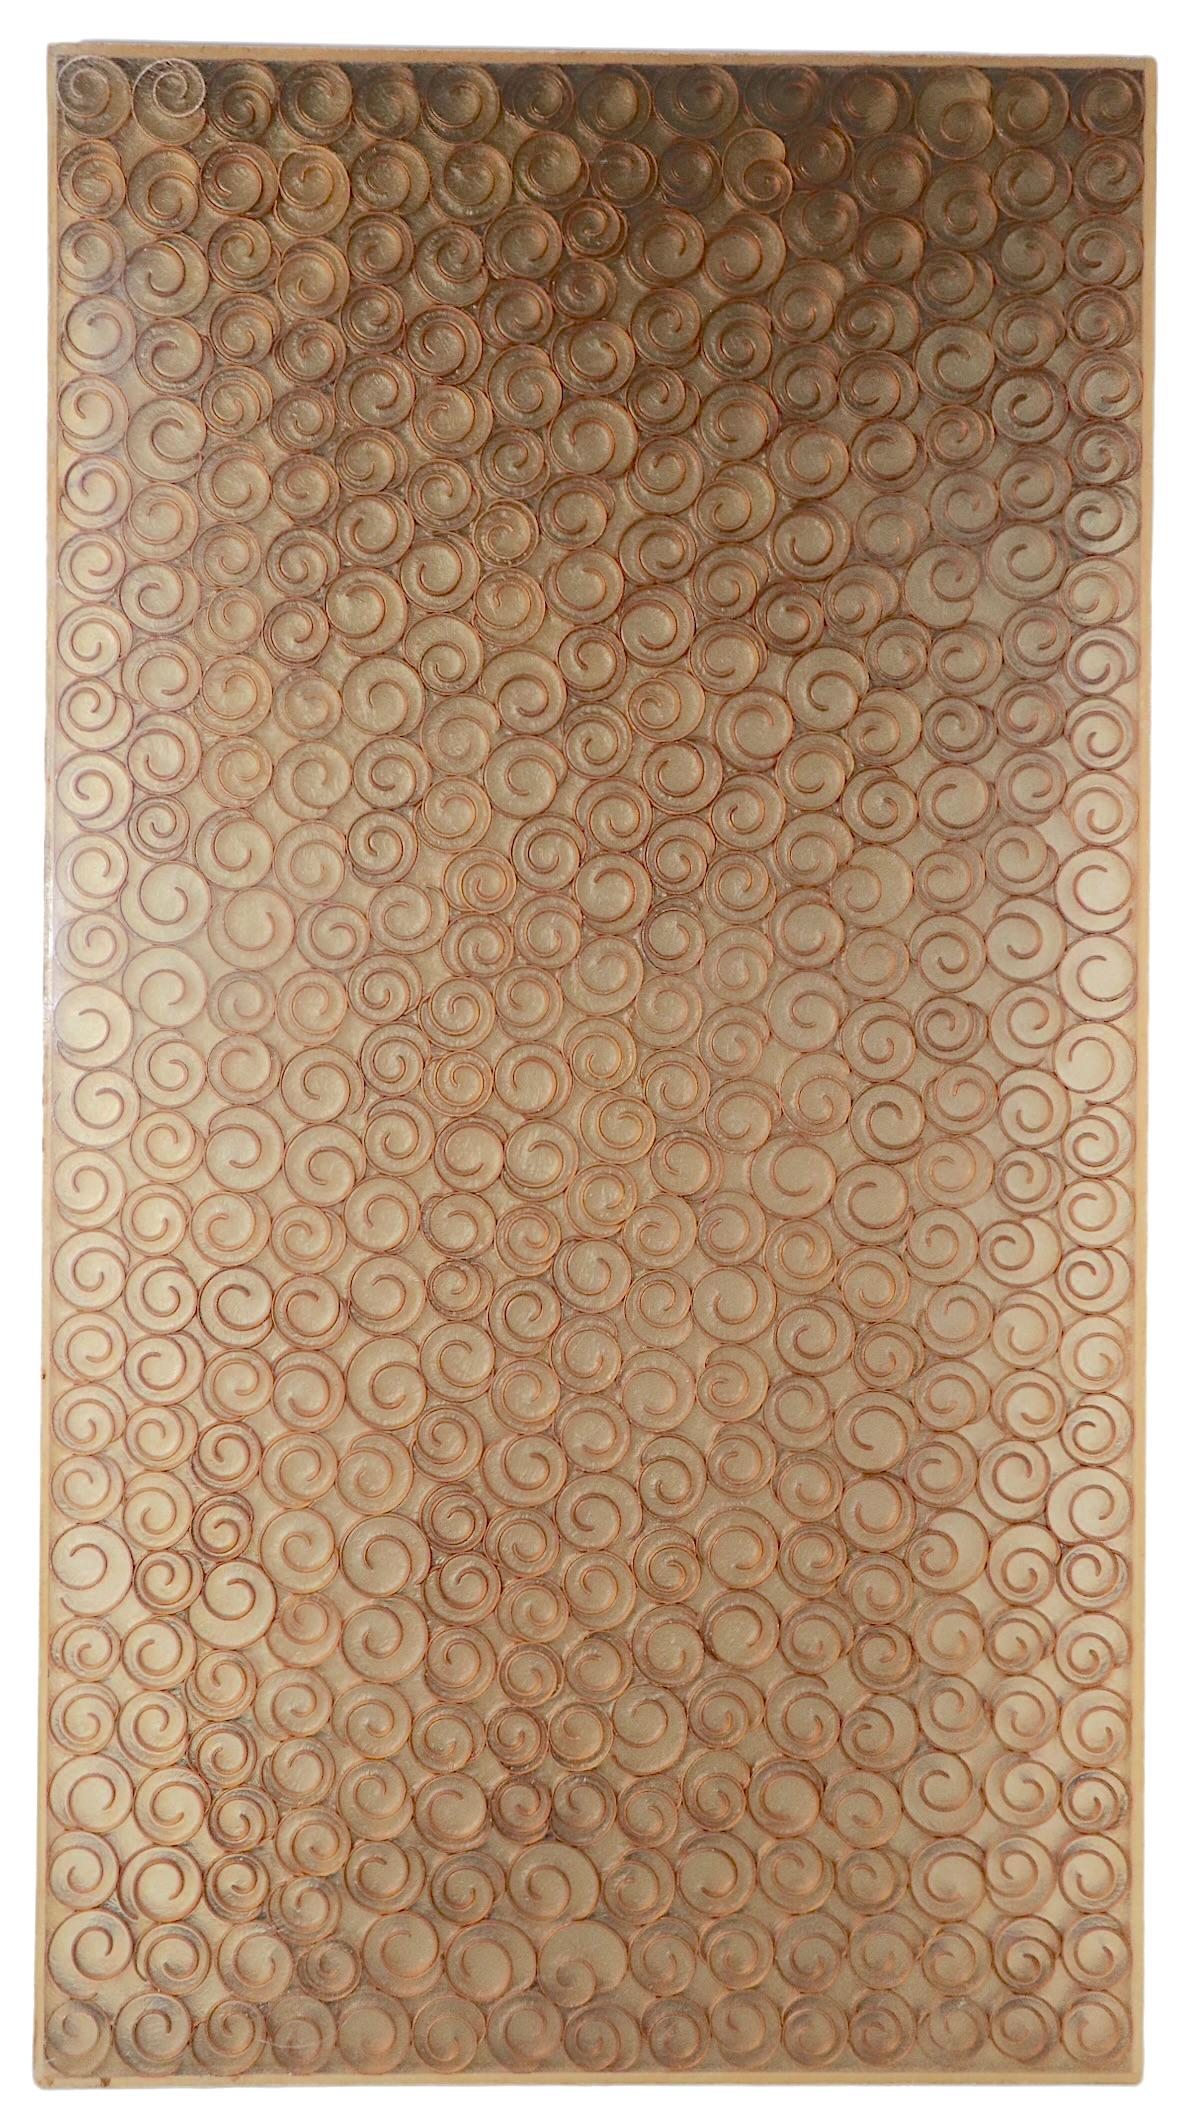 Modernist Translucent Architectural Panel with Repeating Curlicue Field Motif For Sale 3